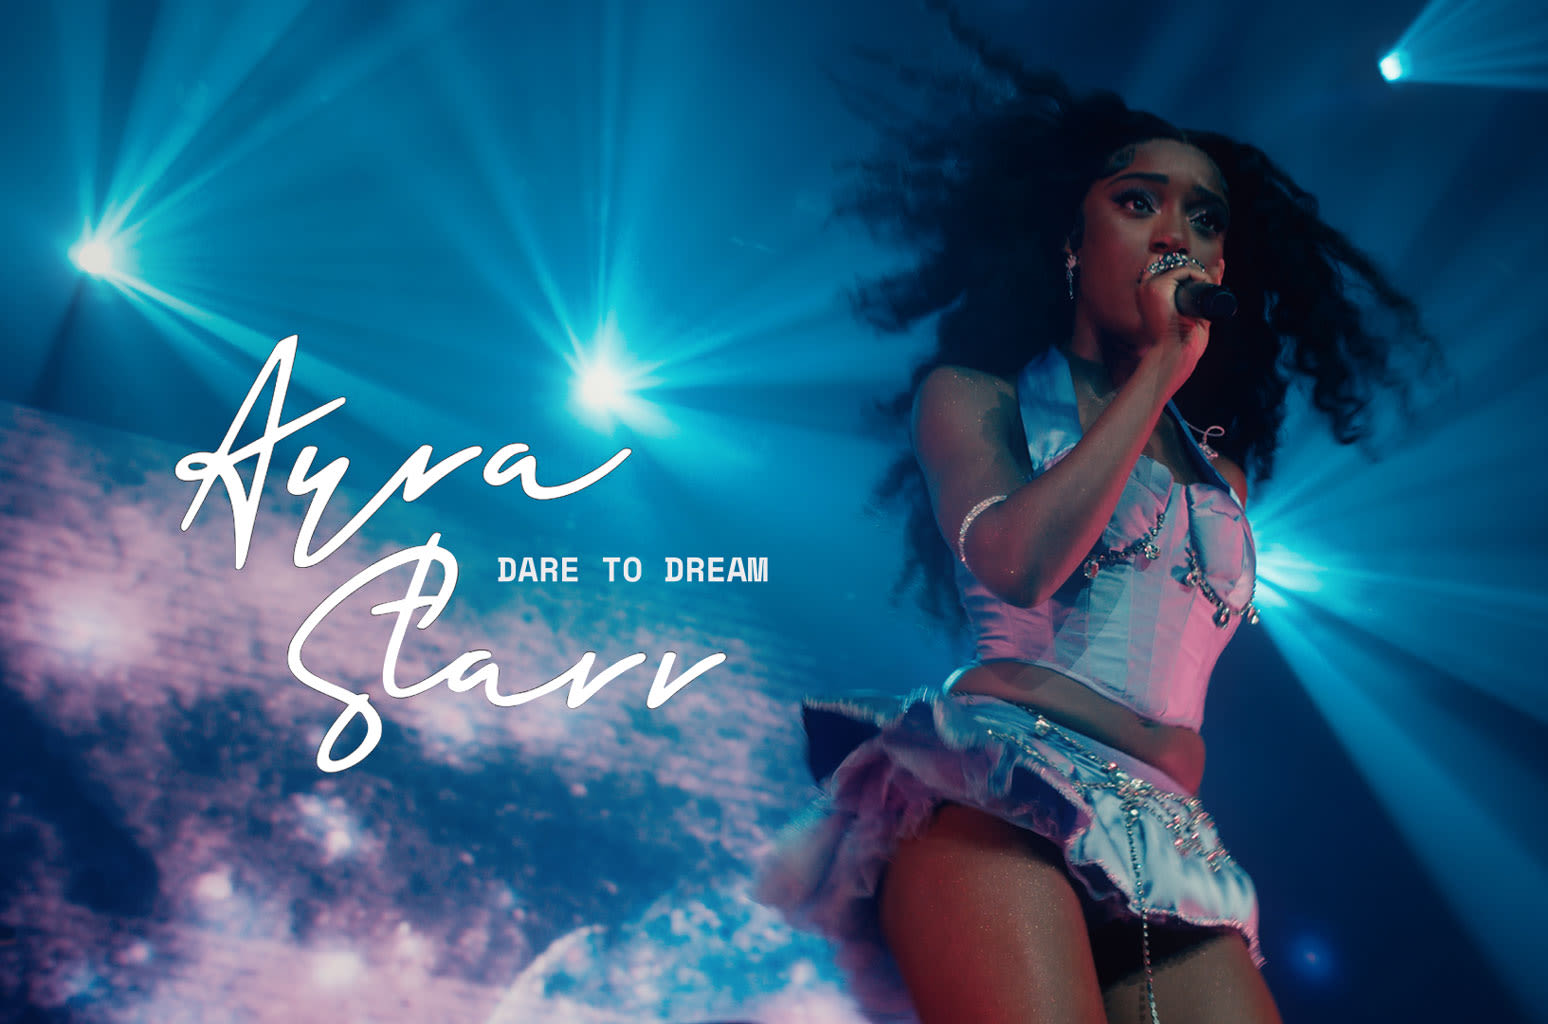 Ayra Starr Stars in ‘Dare to Dream’ Documentary & Becomes Amazon Music’s First Afrobeats Breakthrough Artist